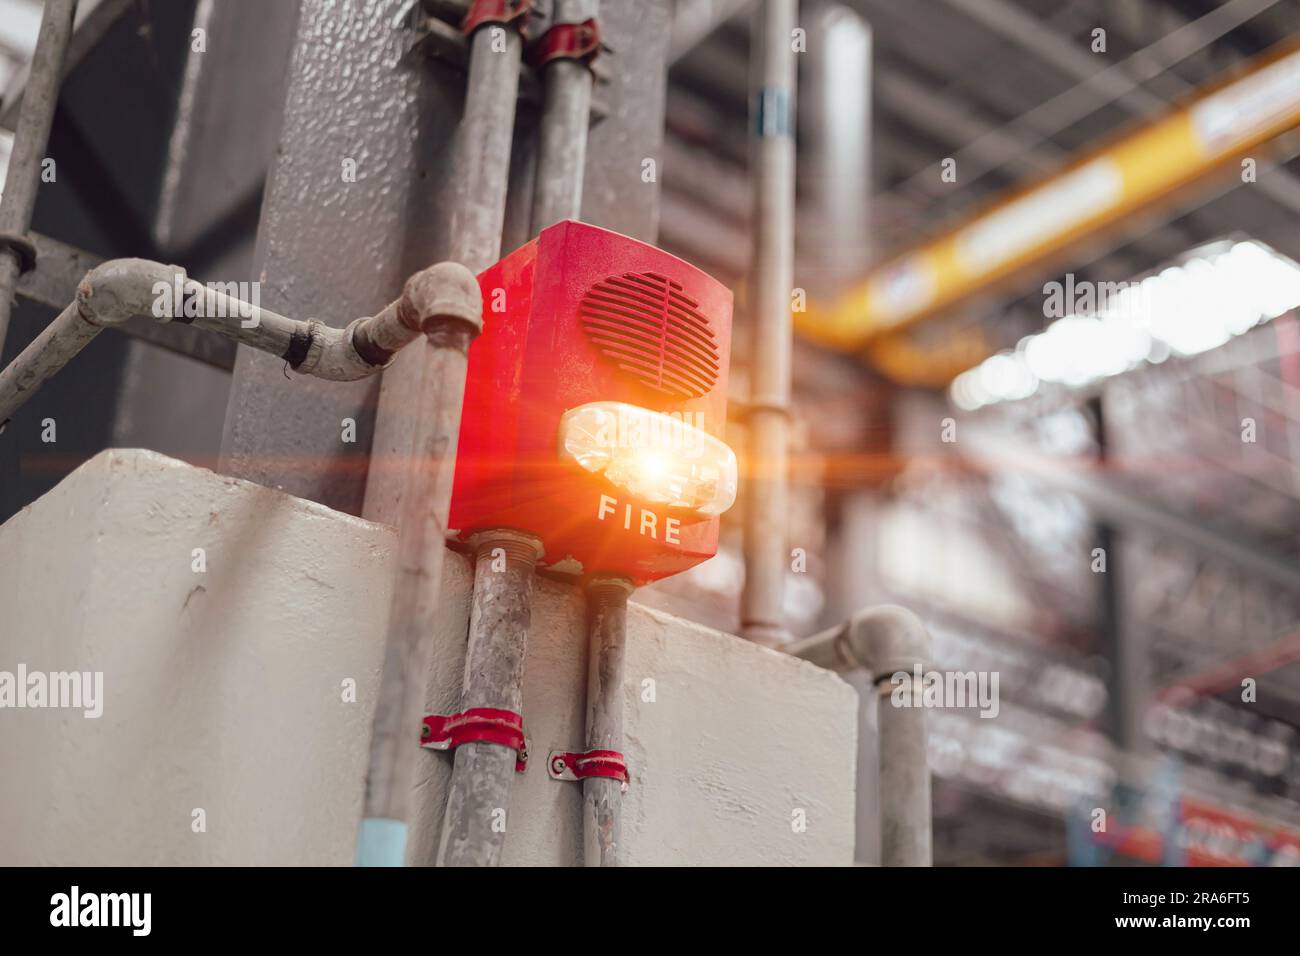 Fire Alarm Fire Detector with quick strobe light alert speaker wall mount for industrial building safety equipment. Stock Photo